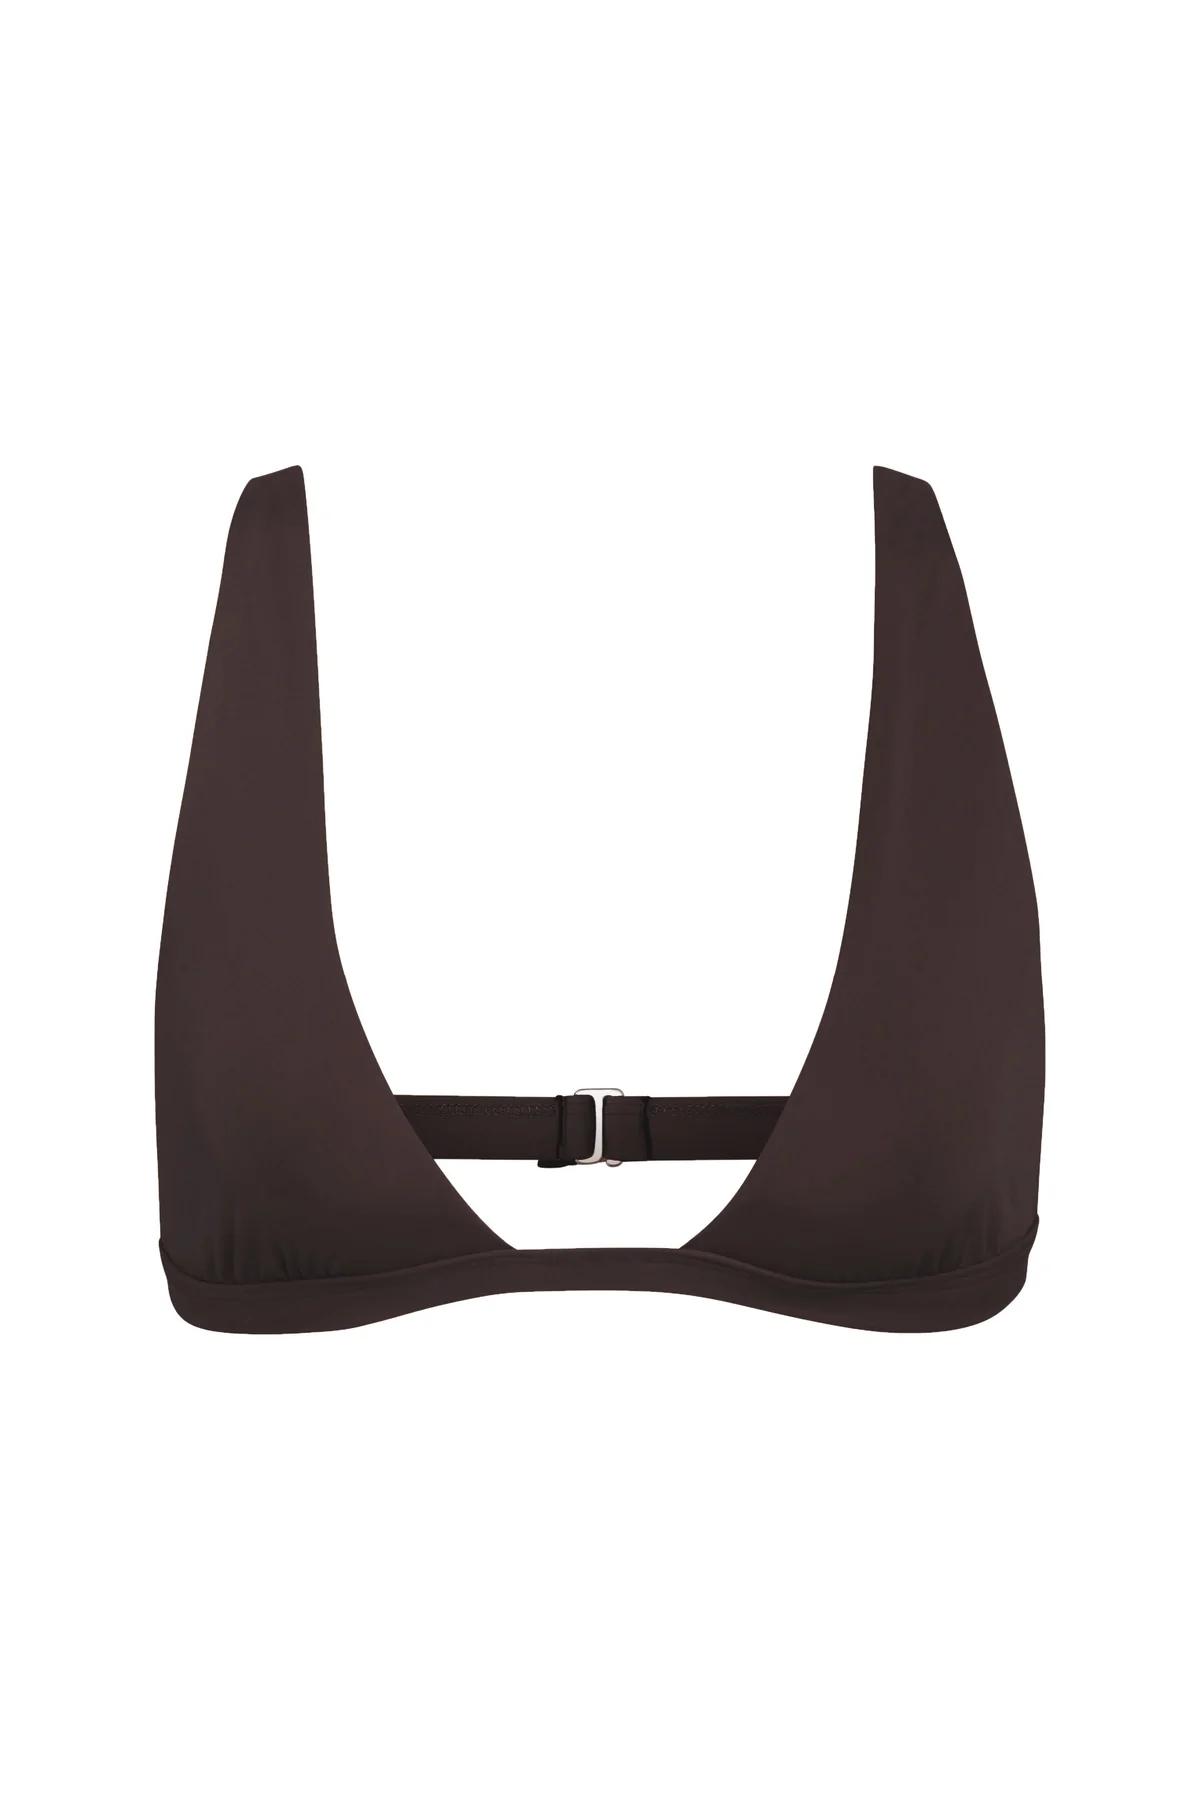 Product Image for The Decollete Triangle Top, Espresso